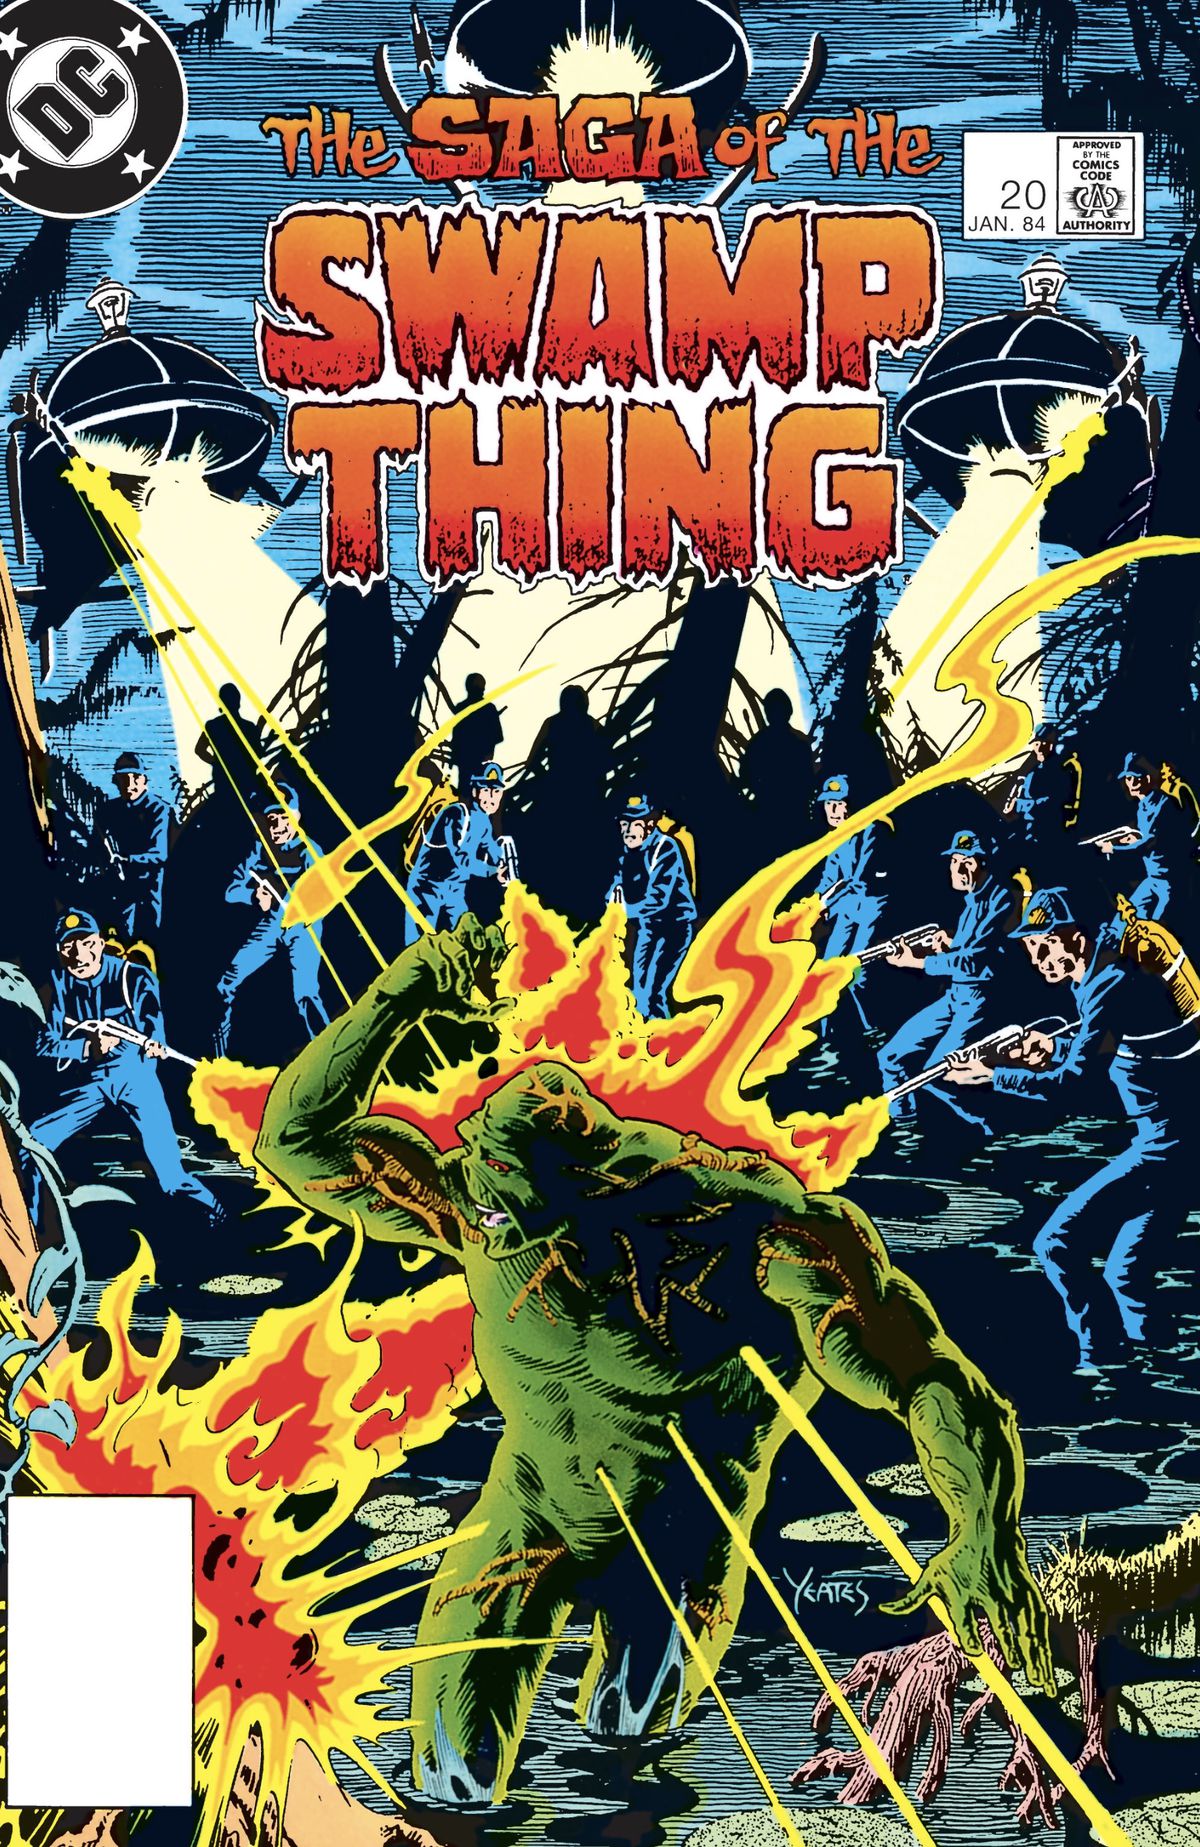 Swamp Thing flees uniformed men with flamethrowers and helicopters on the cover of The Saga of Swamp Thing #20, Alan Moore’s first issue. DC Comics (1984). 